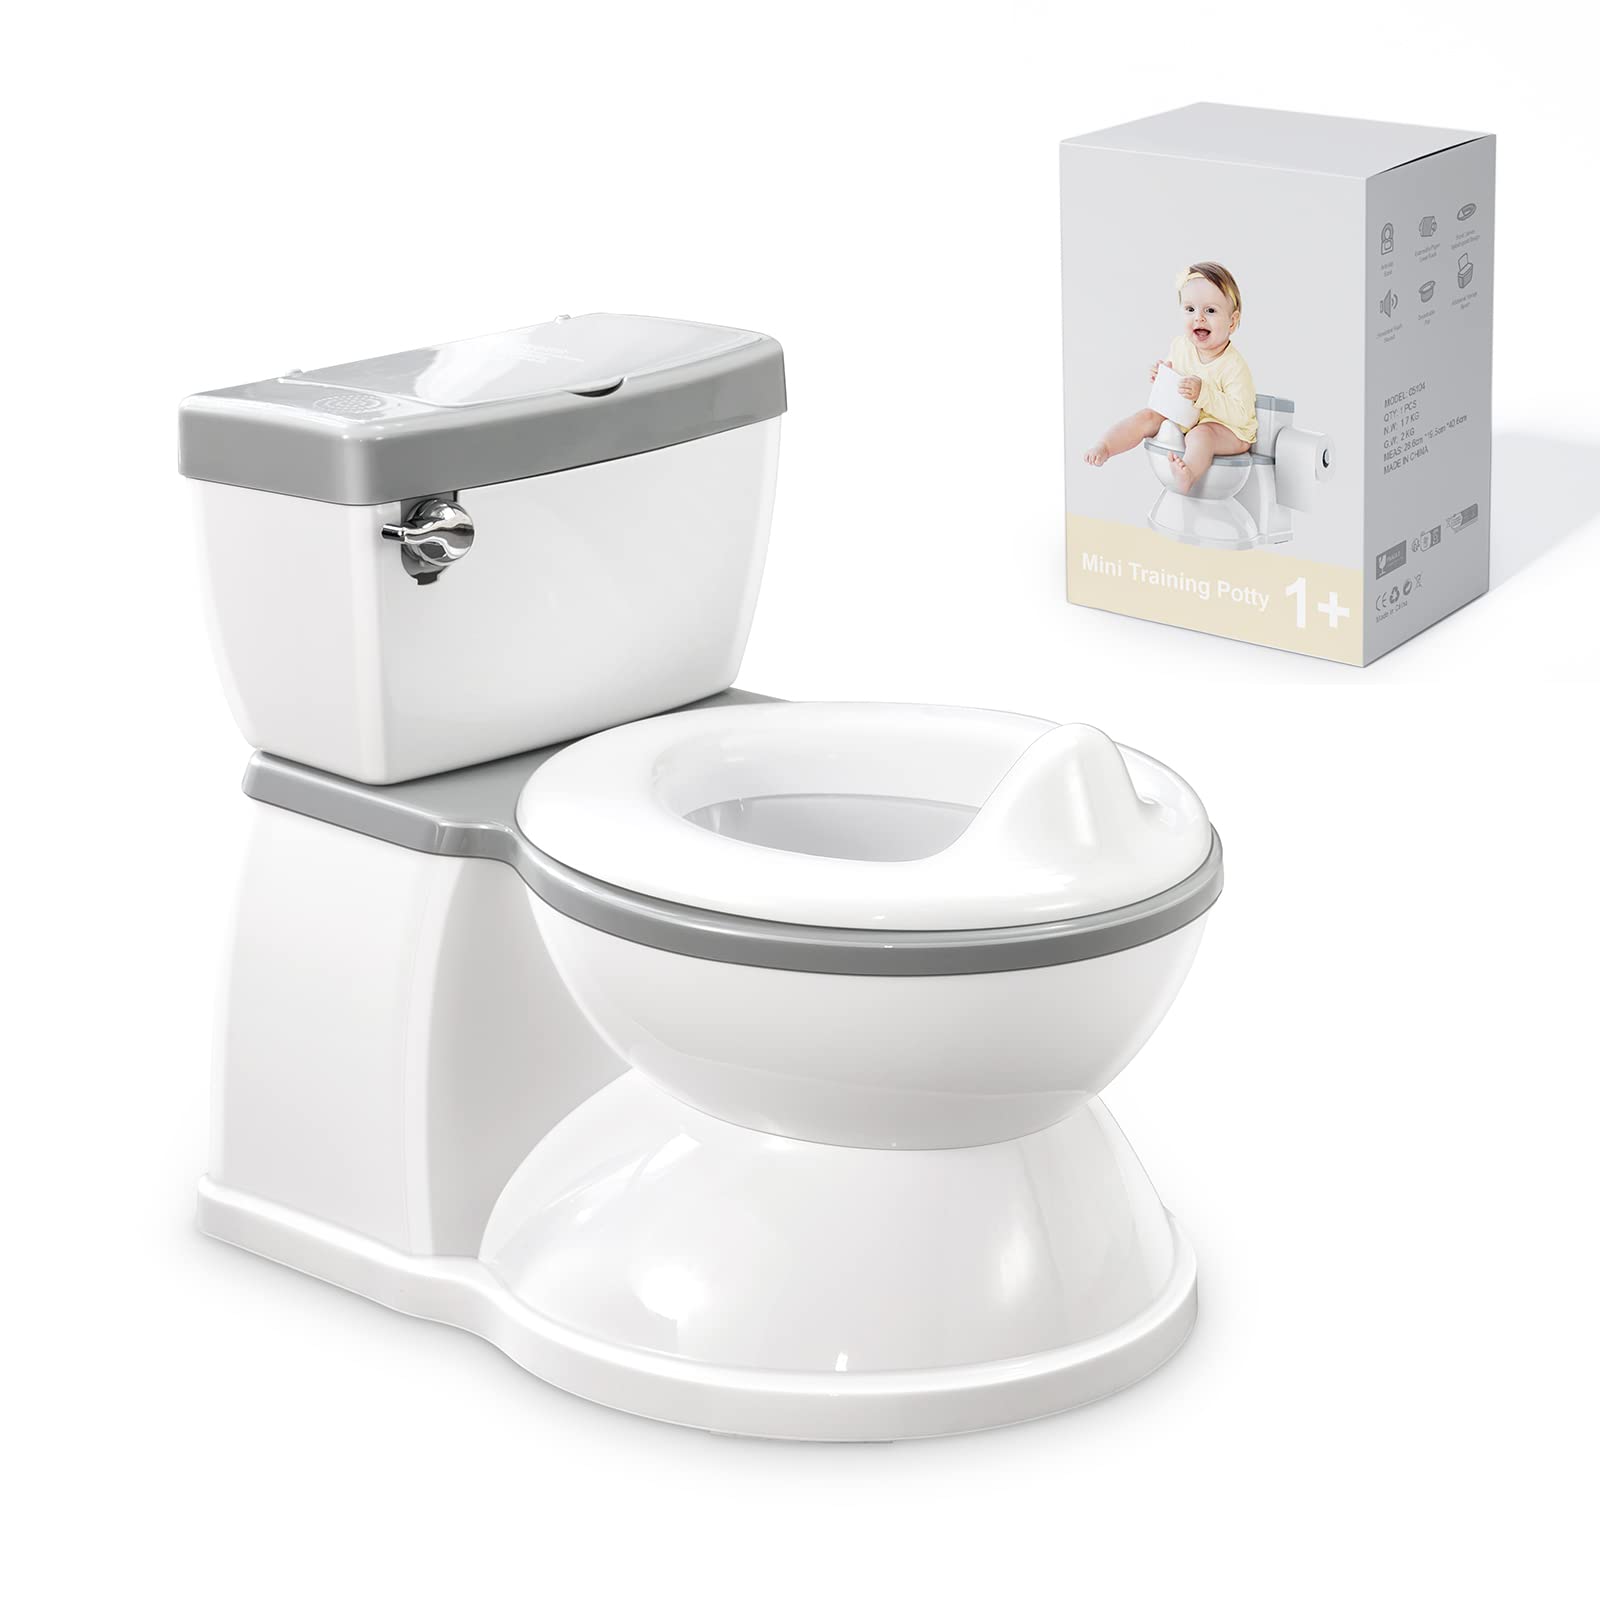 SYCYH Baby Real Potty Training Toilet with Life-Like Flush Button